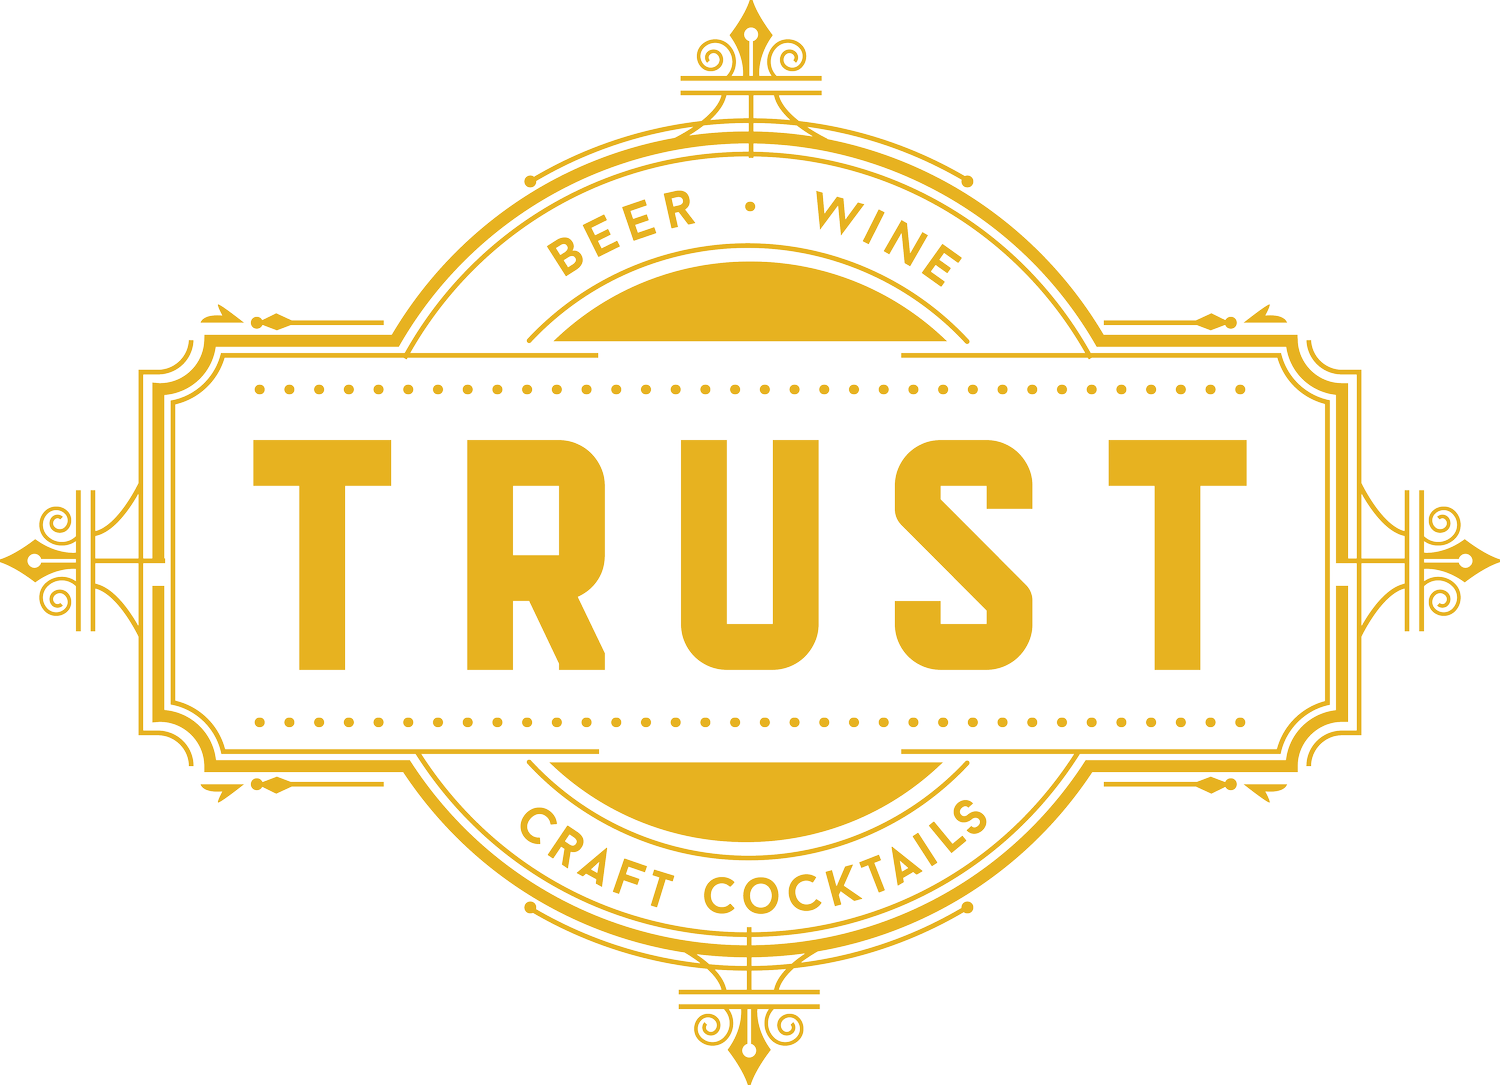 Trust - St. Louis Event Space & Craft Cocktail Bar